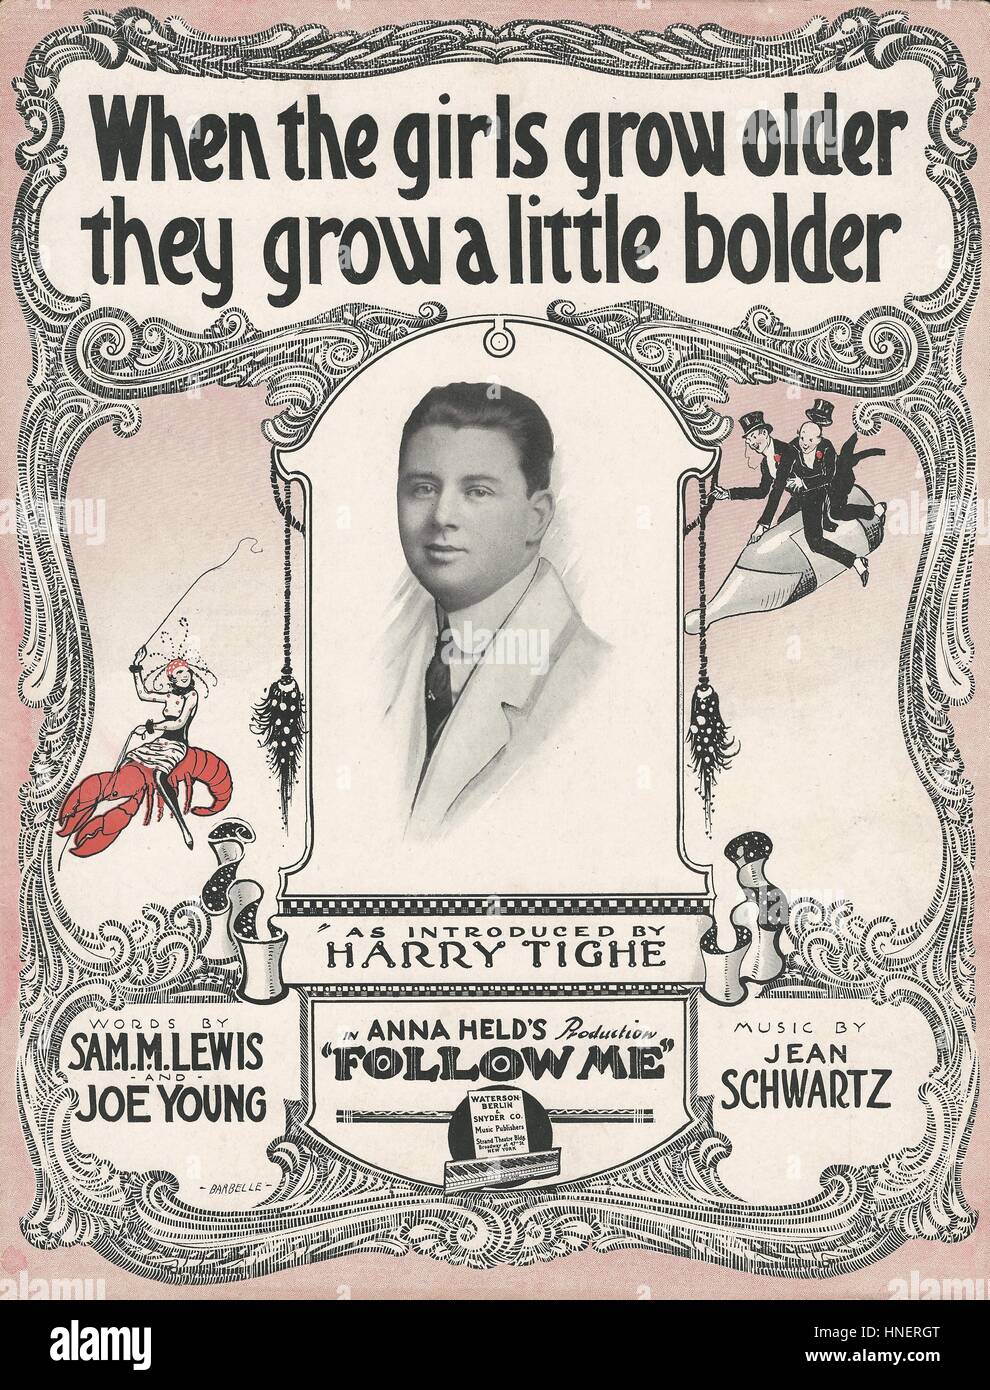 'When the Girls Grow Older They Grow a Little Bolder' from the 1916 Musical 'Follow Me' Sheet Music Cover Stock Photo